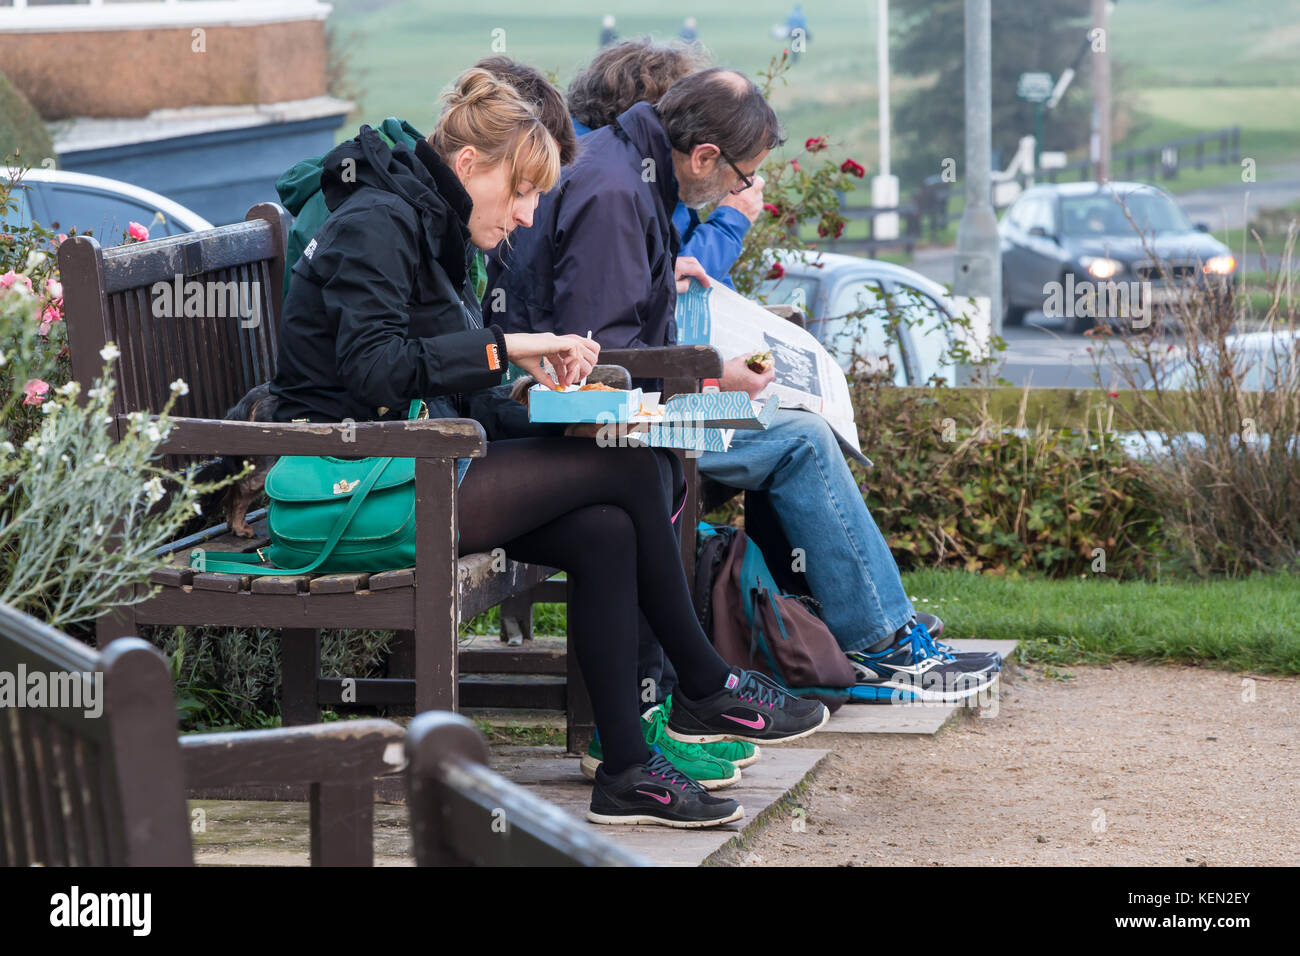 People eating traditional English fish and chips at an outdoor seating area at Alnmouth, Northumberland, UK Stock Photo